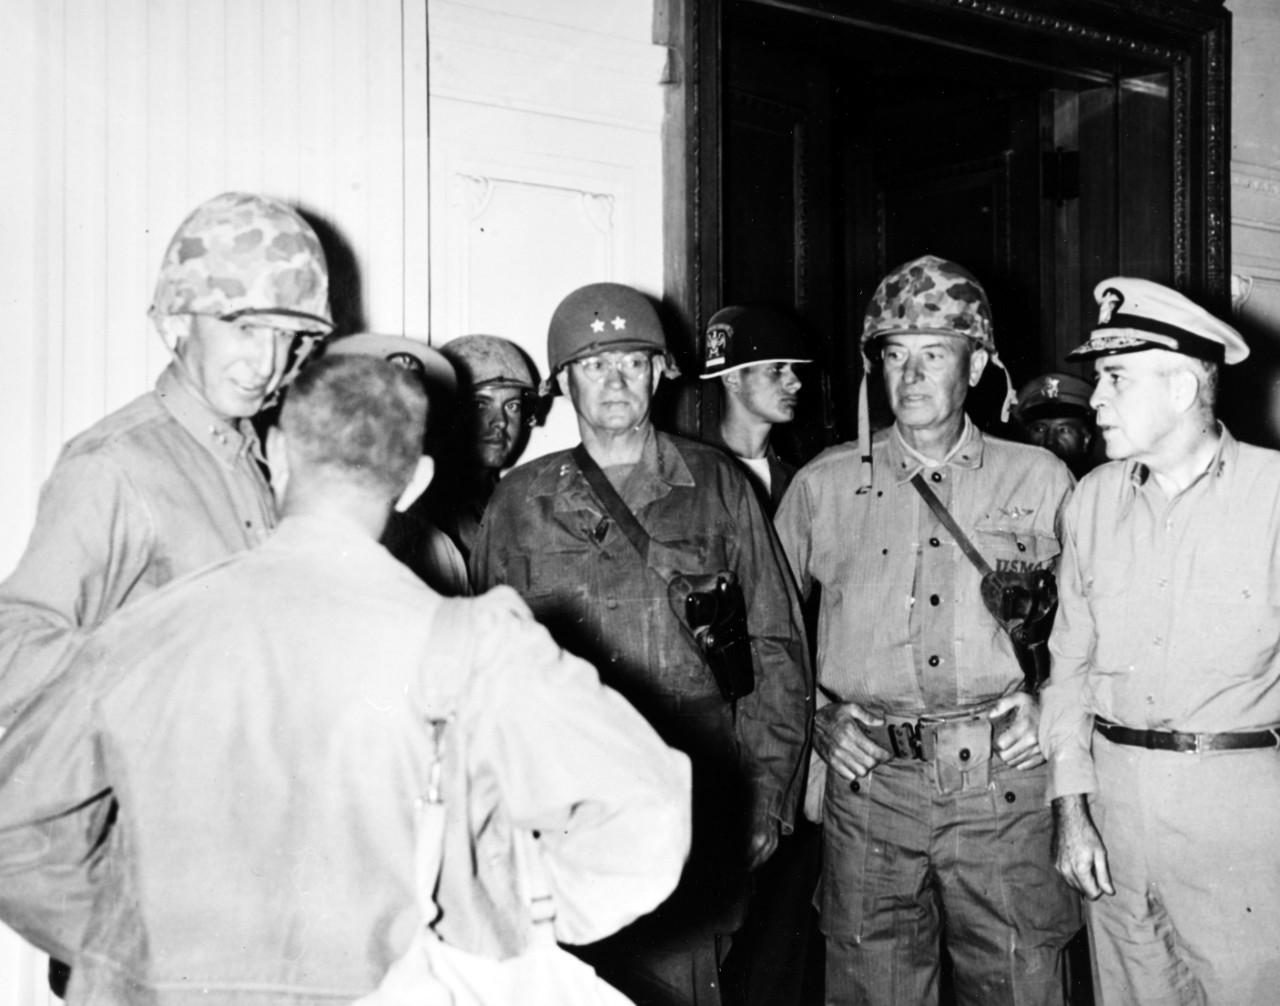 Senior U.S. commanders assembled for the formal ceremonies in which General of the Army Douglas MacArthur returned the capital city to the Republic of Korea government, 29 September 1950.